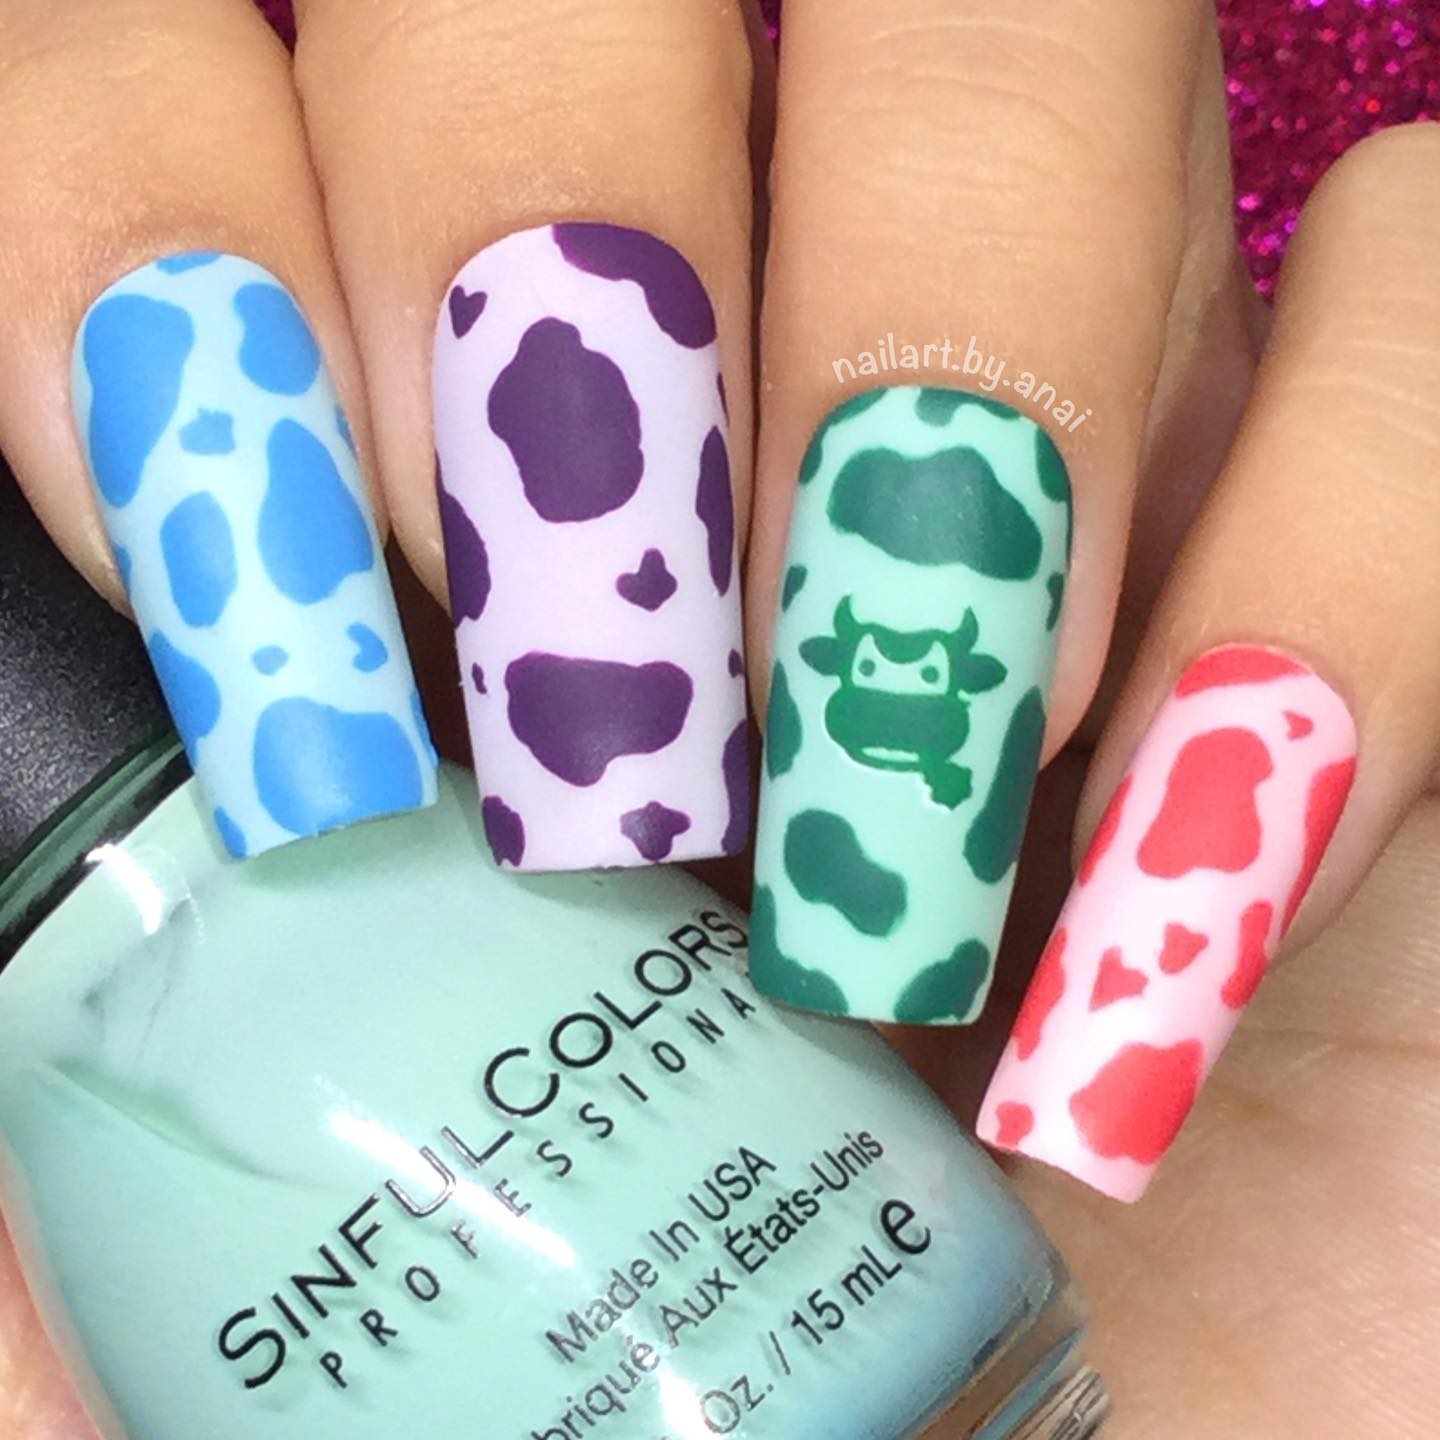 The different colors and patterns in this nail art are adorable! I'm not sure if it's the matte finish or the cow print itself, but there's something about this that reminds of a watercolor painting. It definitely looks like a piece of art!